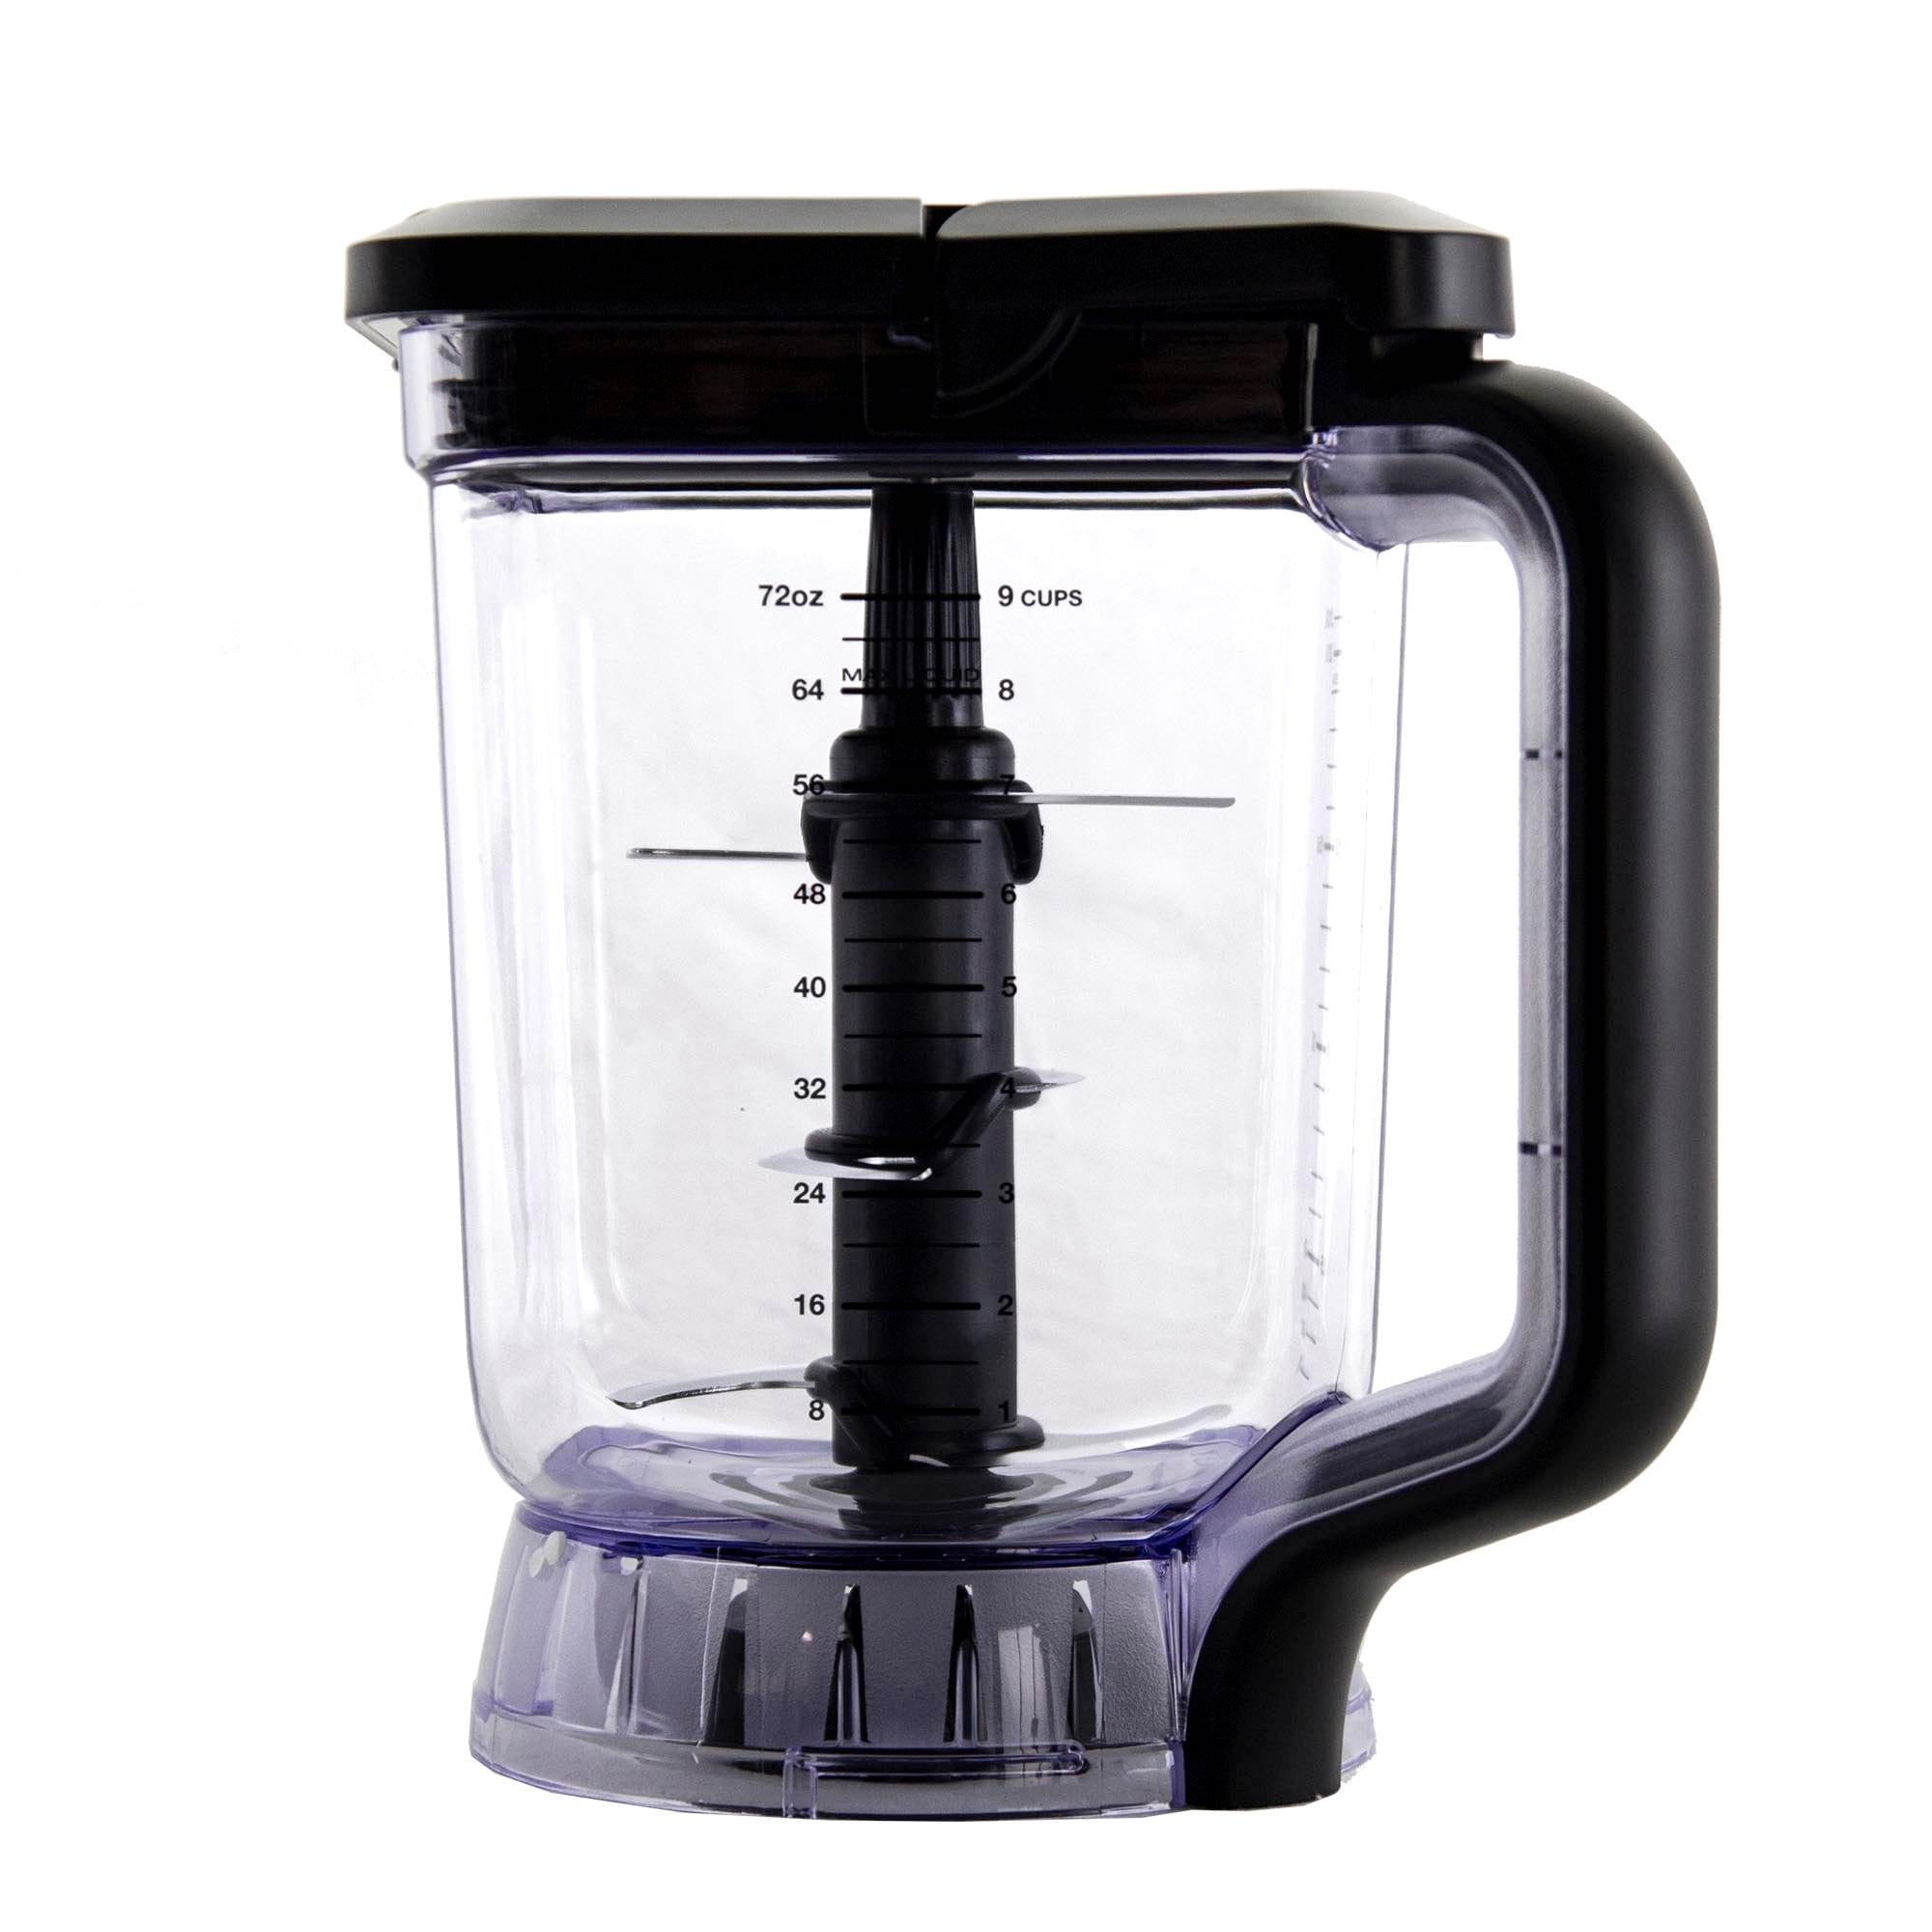  Ninja AMZ493BRN Compact Kitchen System, 1200W, 3 Functions for  Smoothies, Dough & Frozen Drinks with Auto-IQ, 72-oz.* Blender Pitcher,  40-oz. Processor Bowl & 18-oz. Single-Serve Cup, Grey: Home & Kitchen